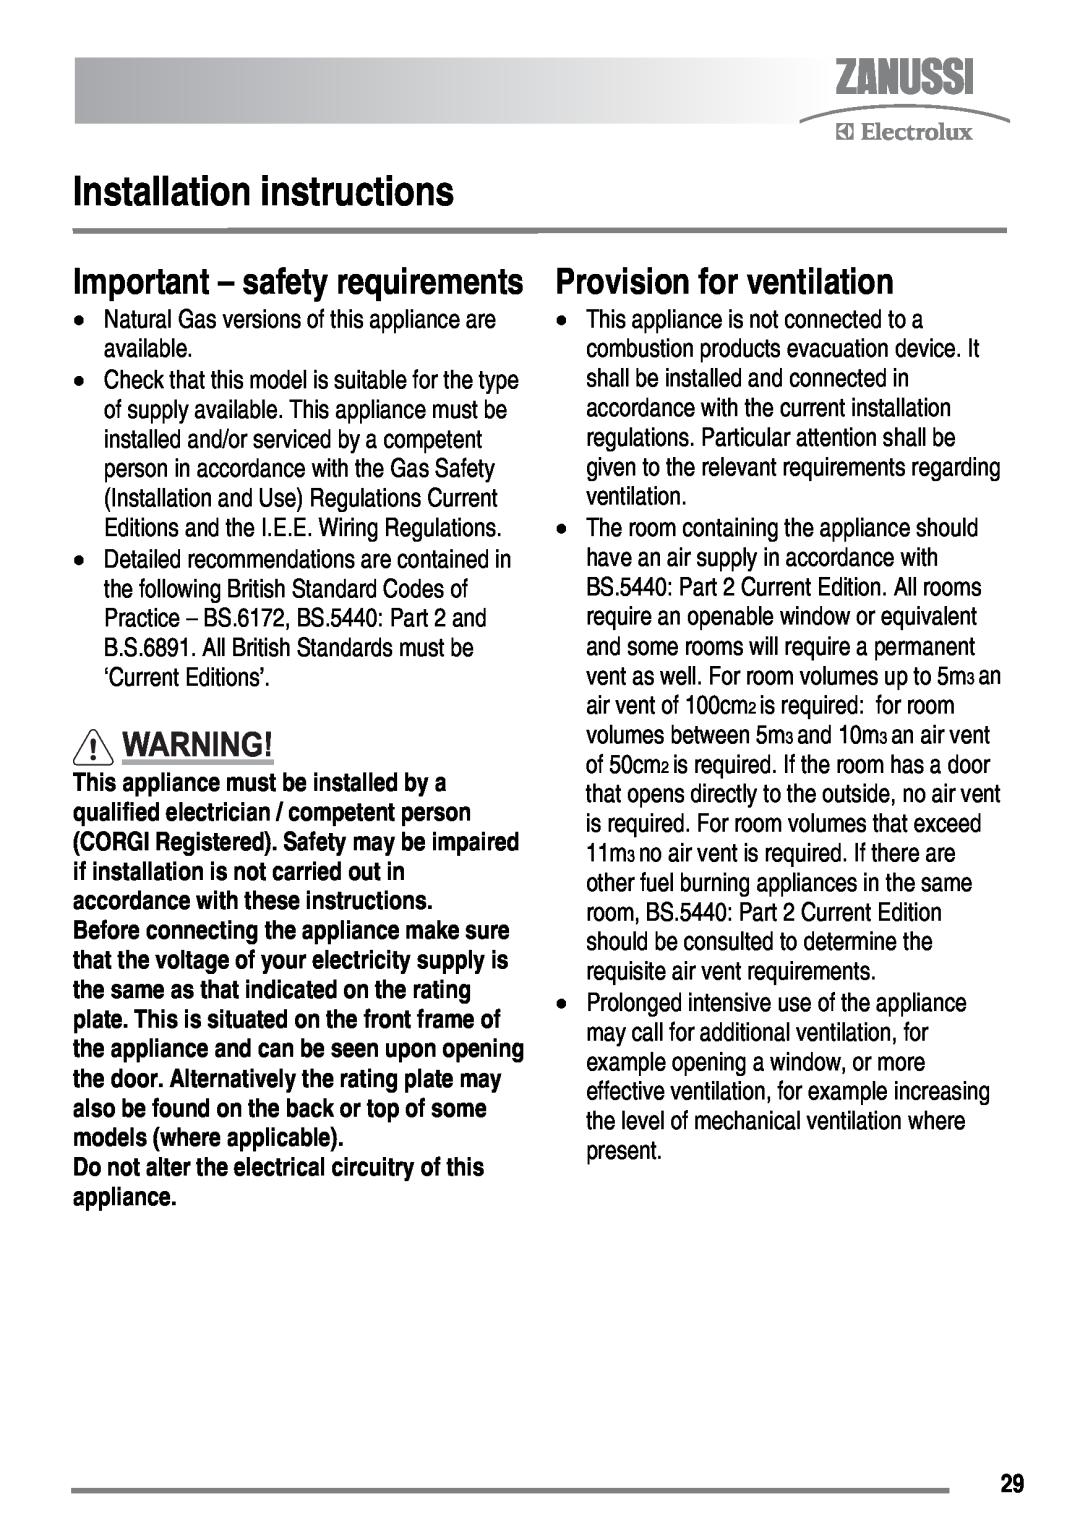 Zanussi ZKG6010 user manual Installation instructions, Provision for ventilation, Important - safety requirements 